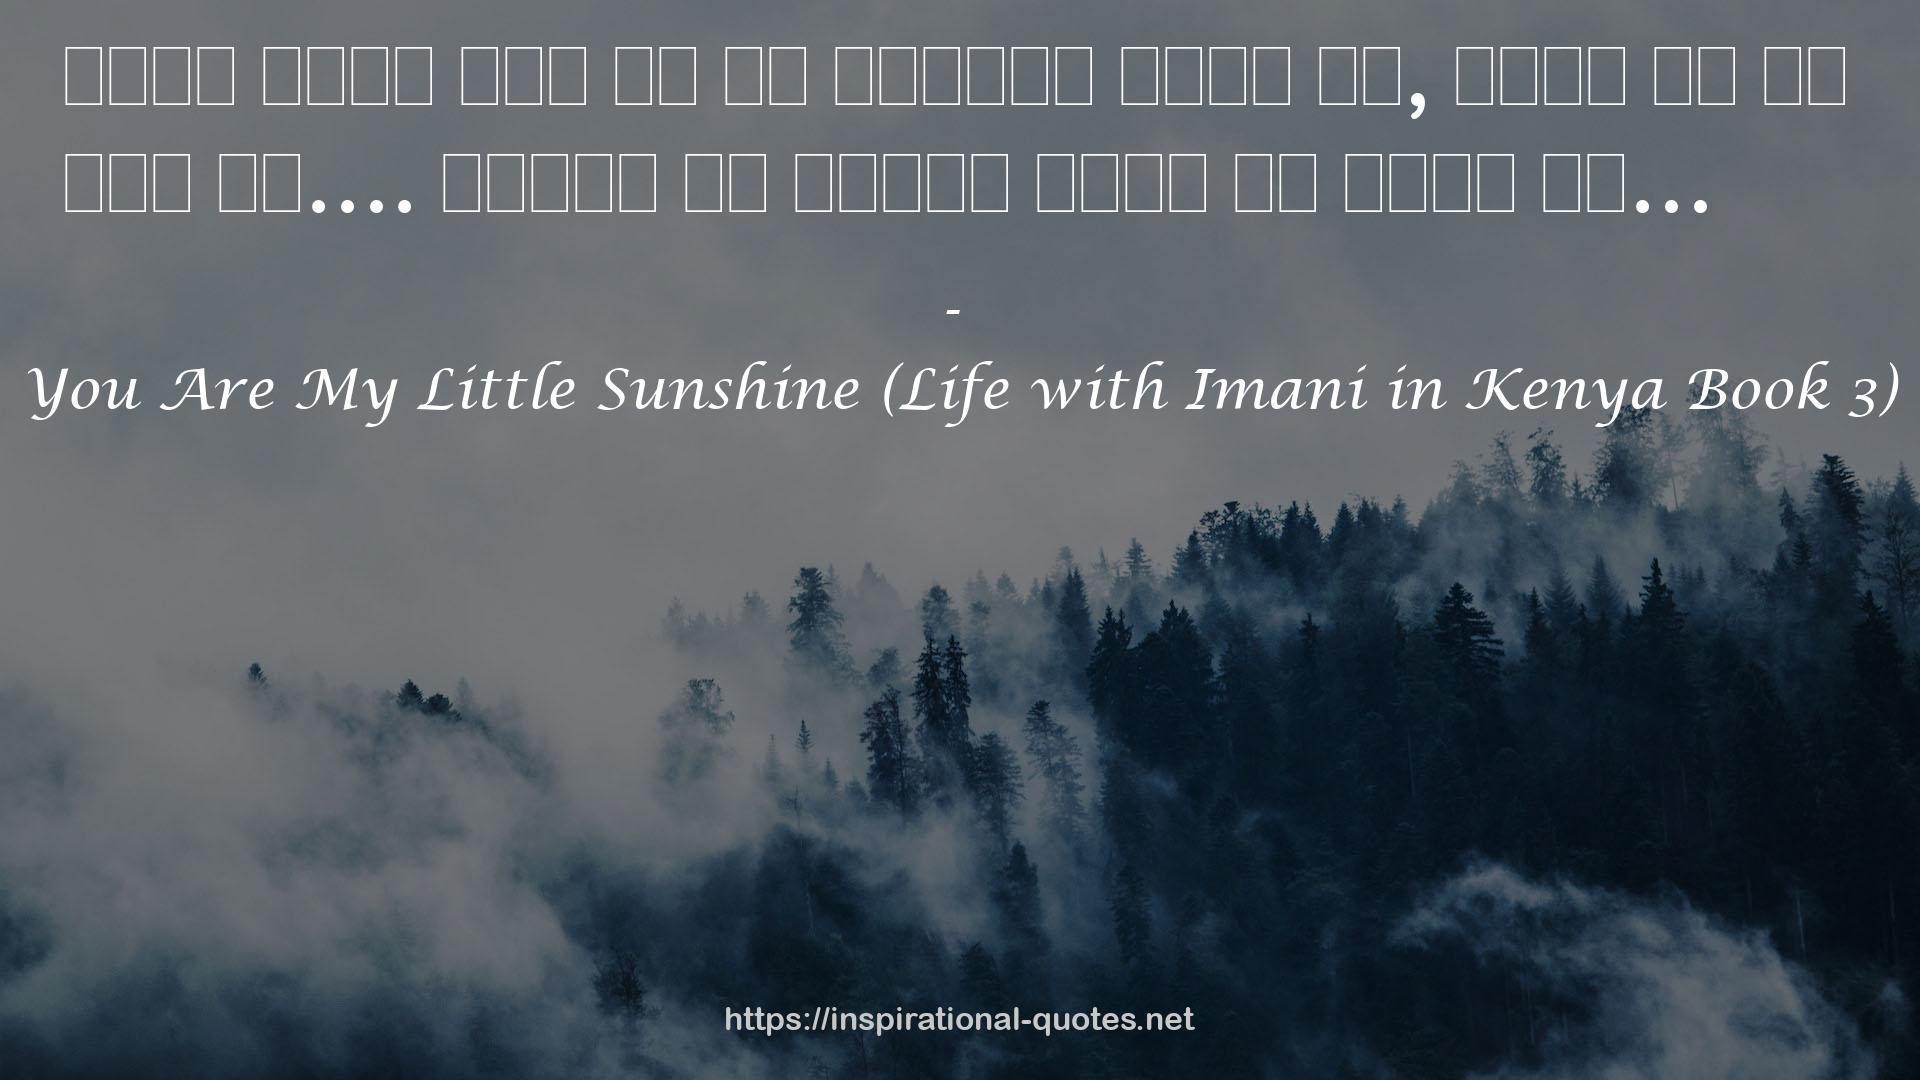 You Are My Little Sunshine (Life with Imani in Kenya Book 3) QUOTES